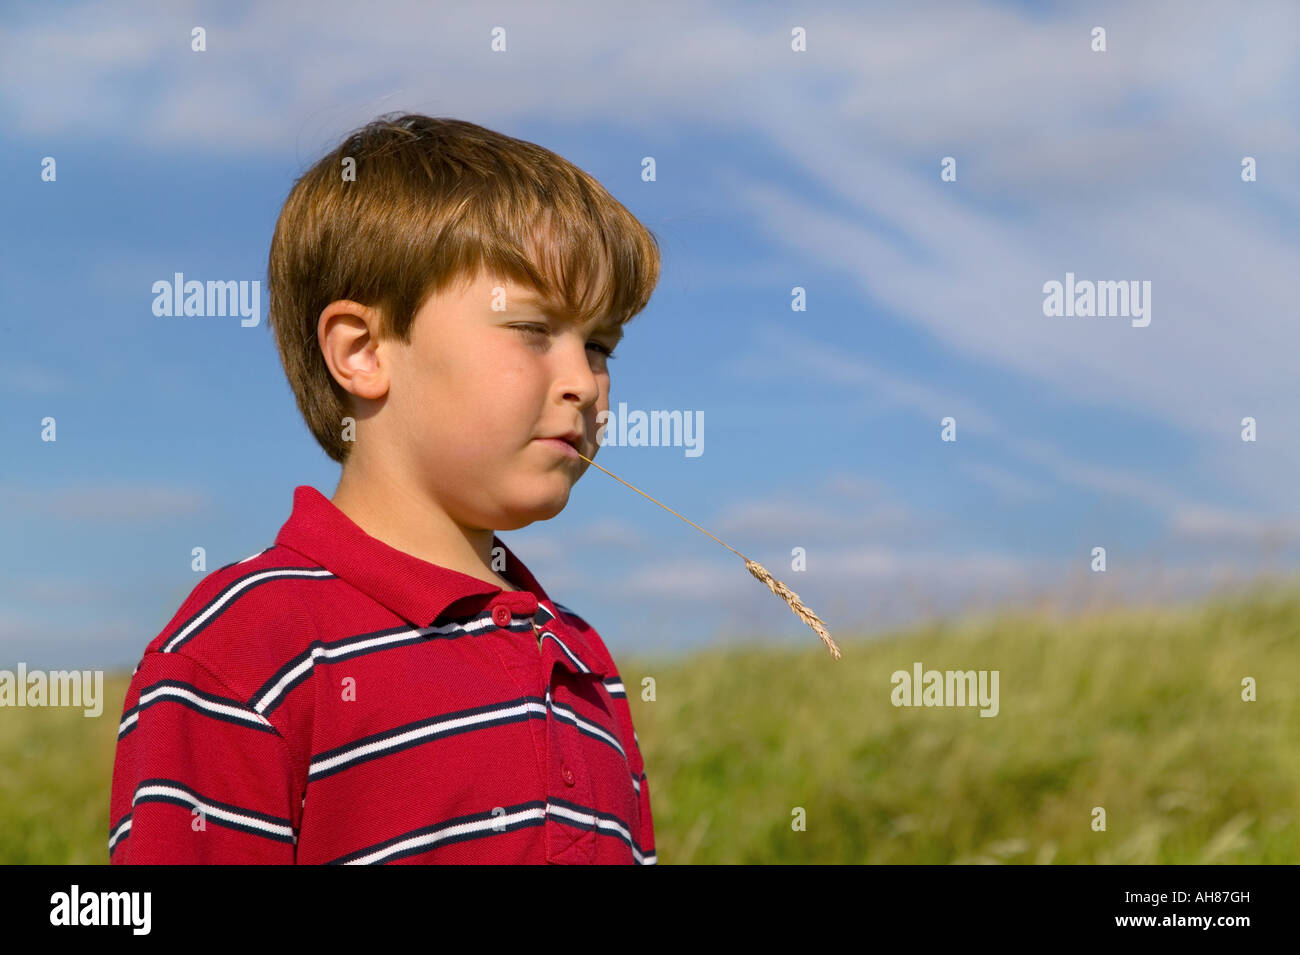 Young boy chewing straw outdoors on a summer day Stock Photo